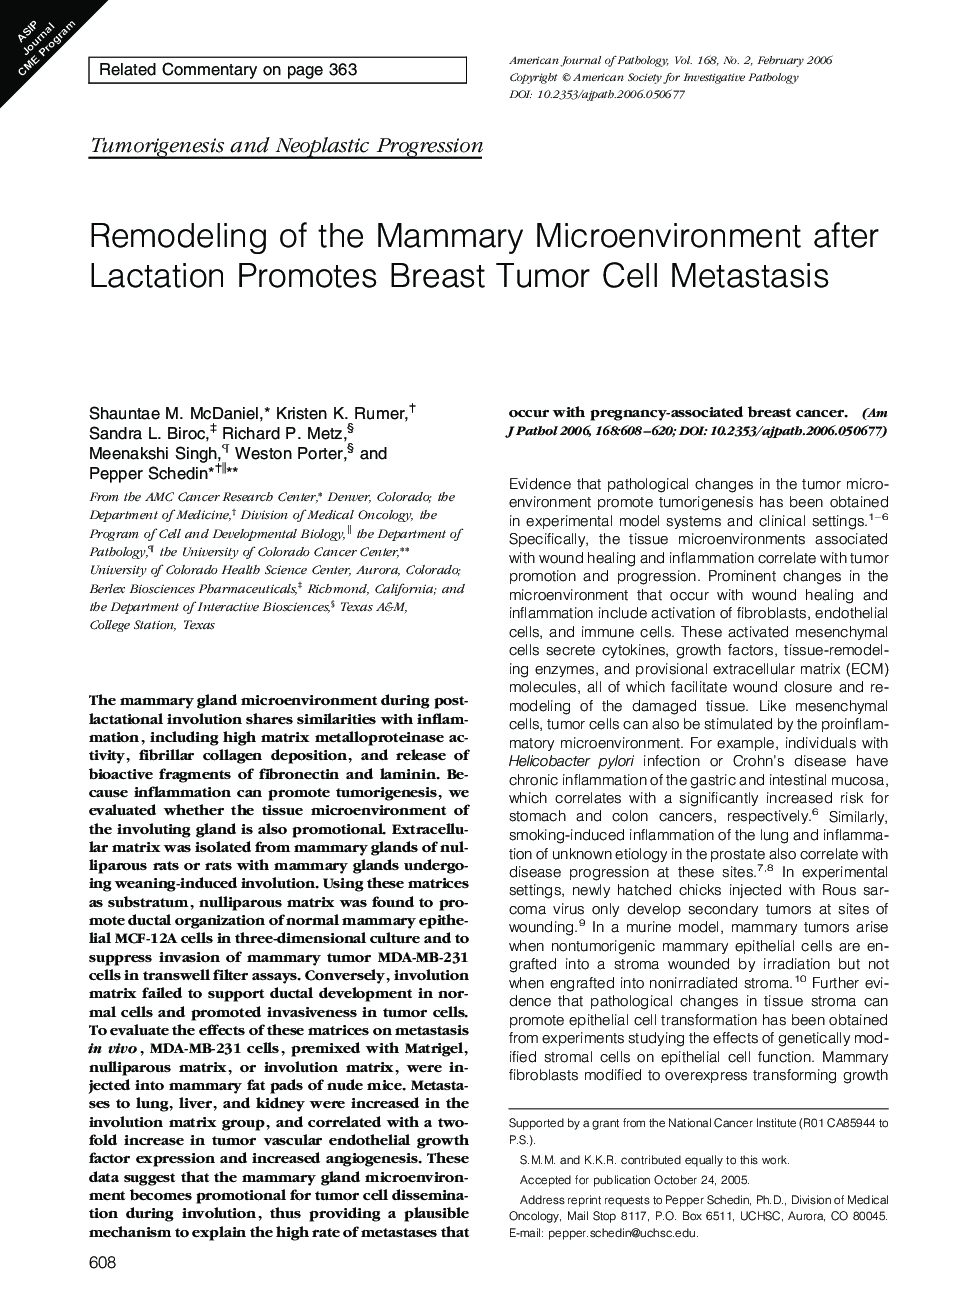 Remodeling of the Mammary Microenvironment after Lactation Promotes Breast Tumor Cell Metastasis